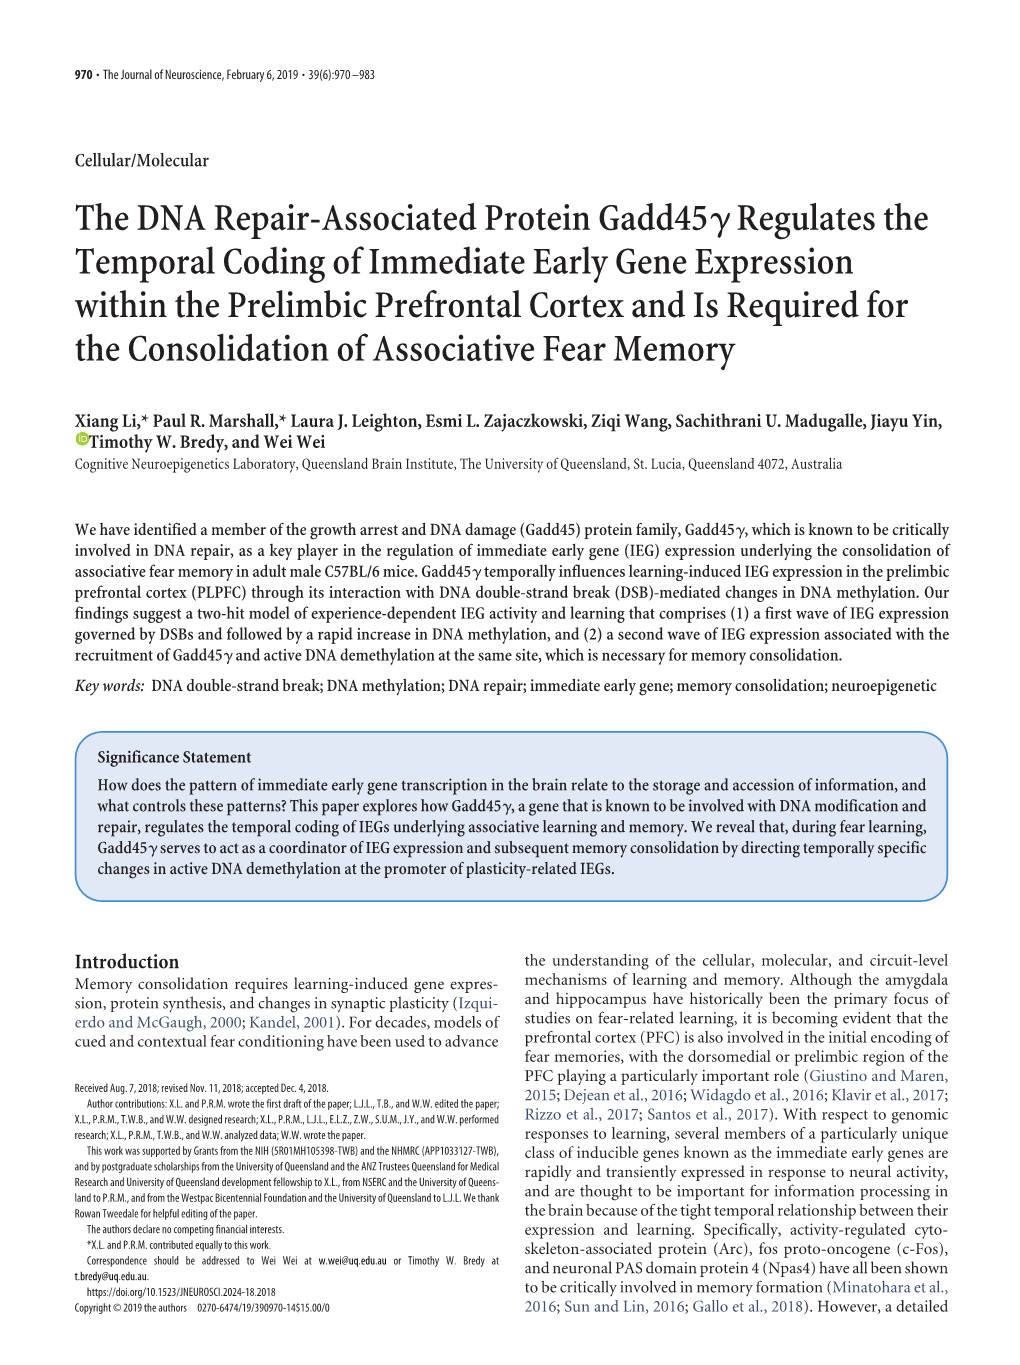 The DNA Repair-Associated Protein Gadd45γ Regulates the Temporal